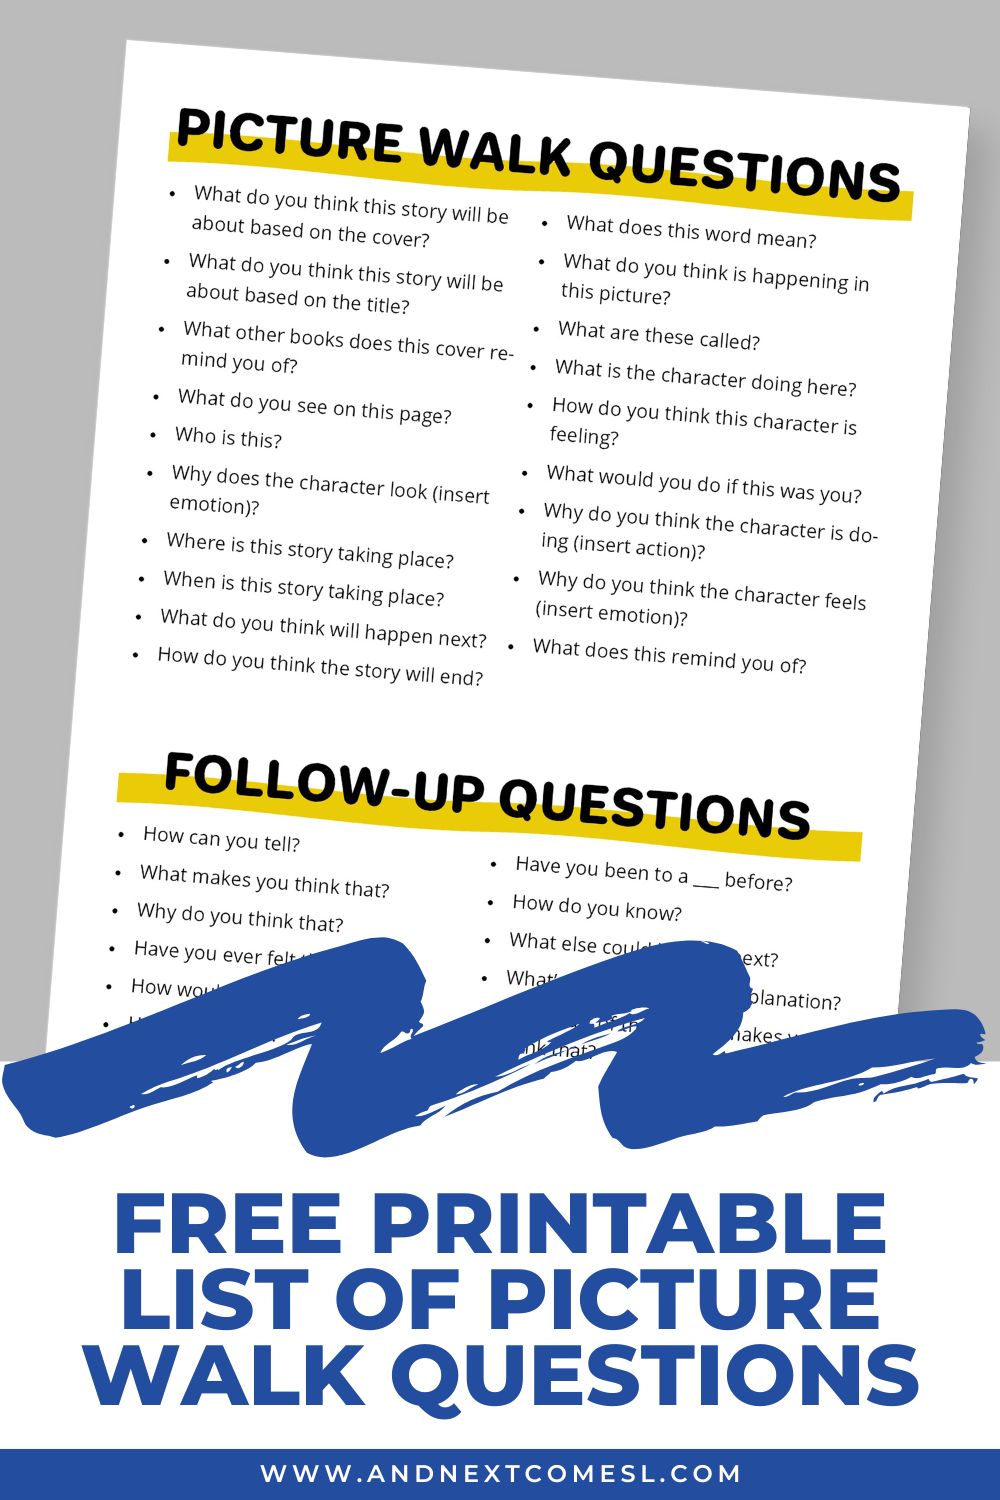 Free printable list of sample questions to ask when doing a picture walk with kids